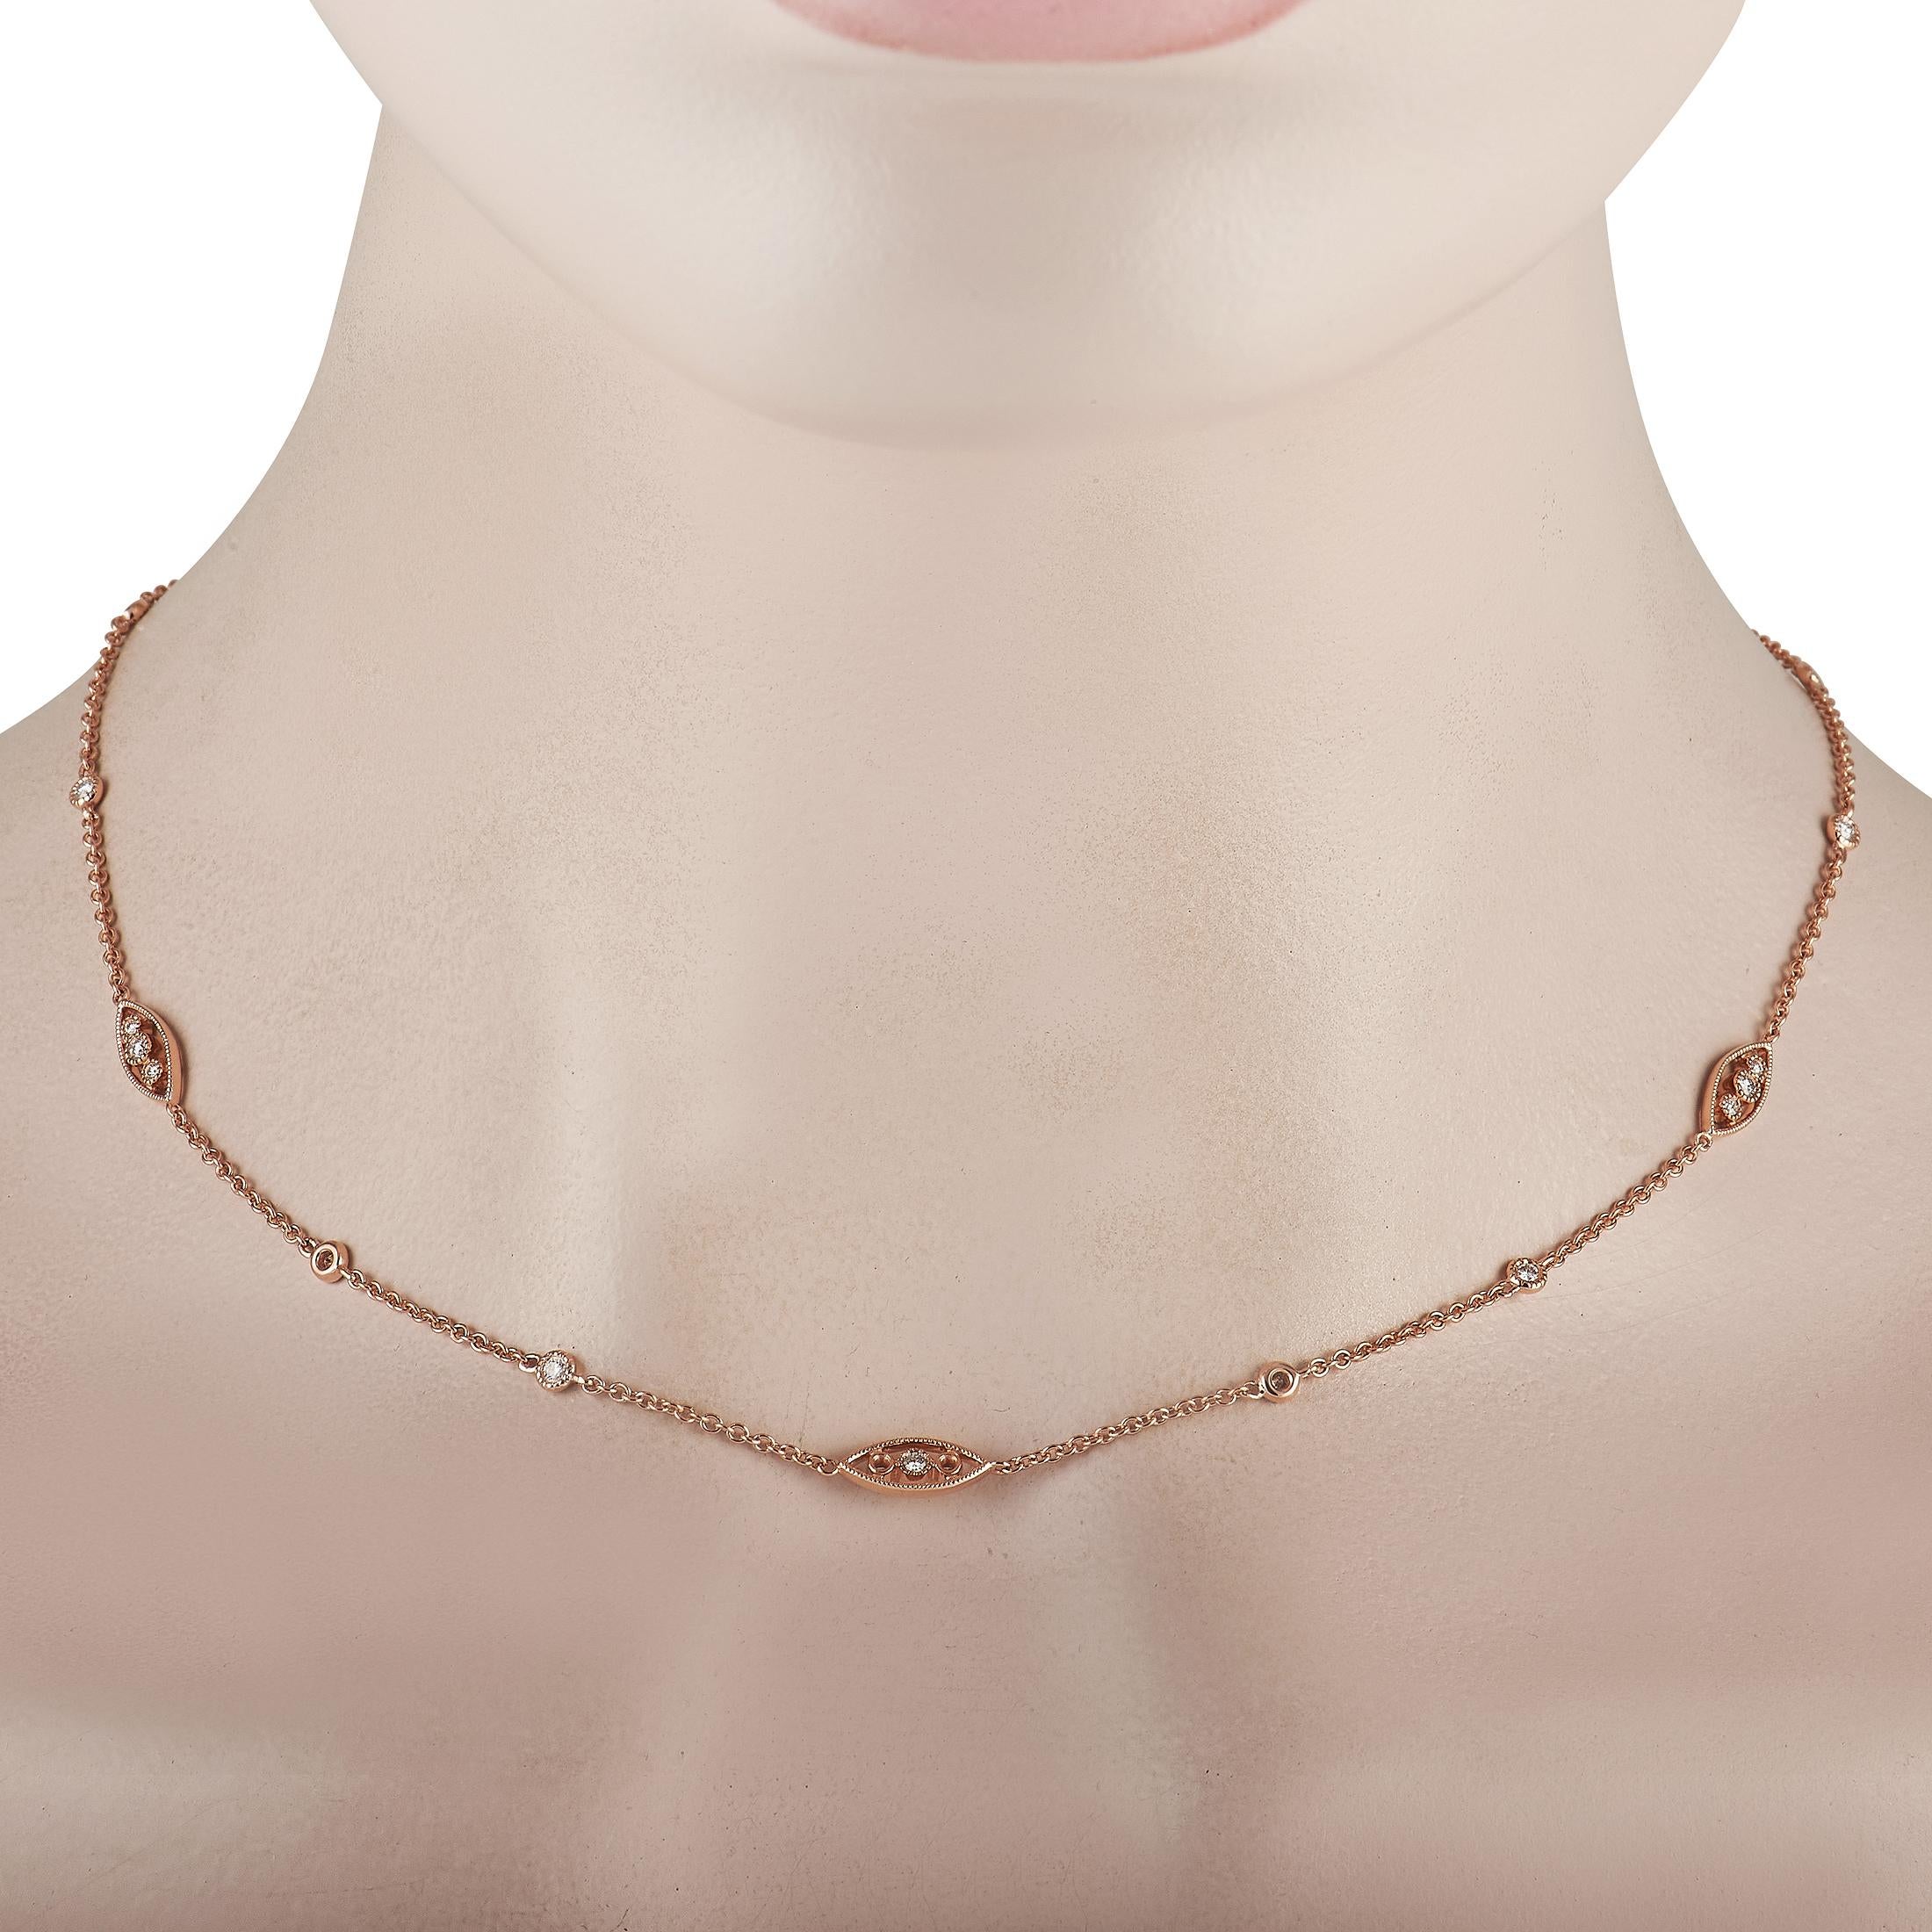 A delicate 18K Rose Gold chain, dynamic accents, and glittering diamonds totaling 0.61 carats make this necklace simply unforgettable. Classic and understated, this elevated piece measures 17” long and comes complete with secure lobster clasp